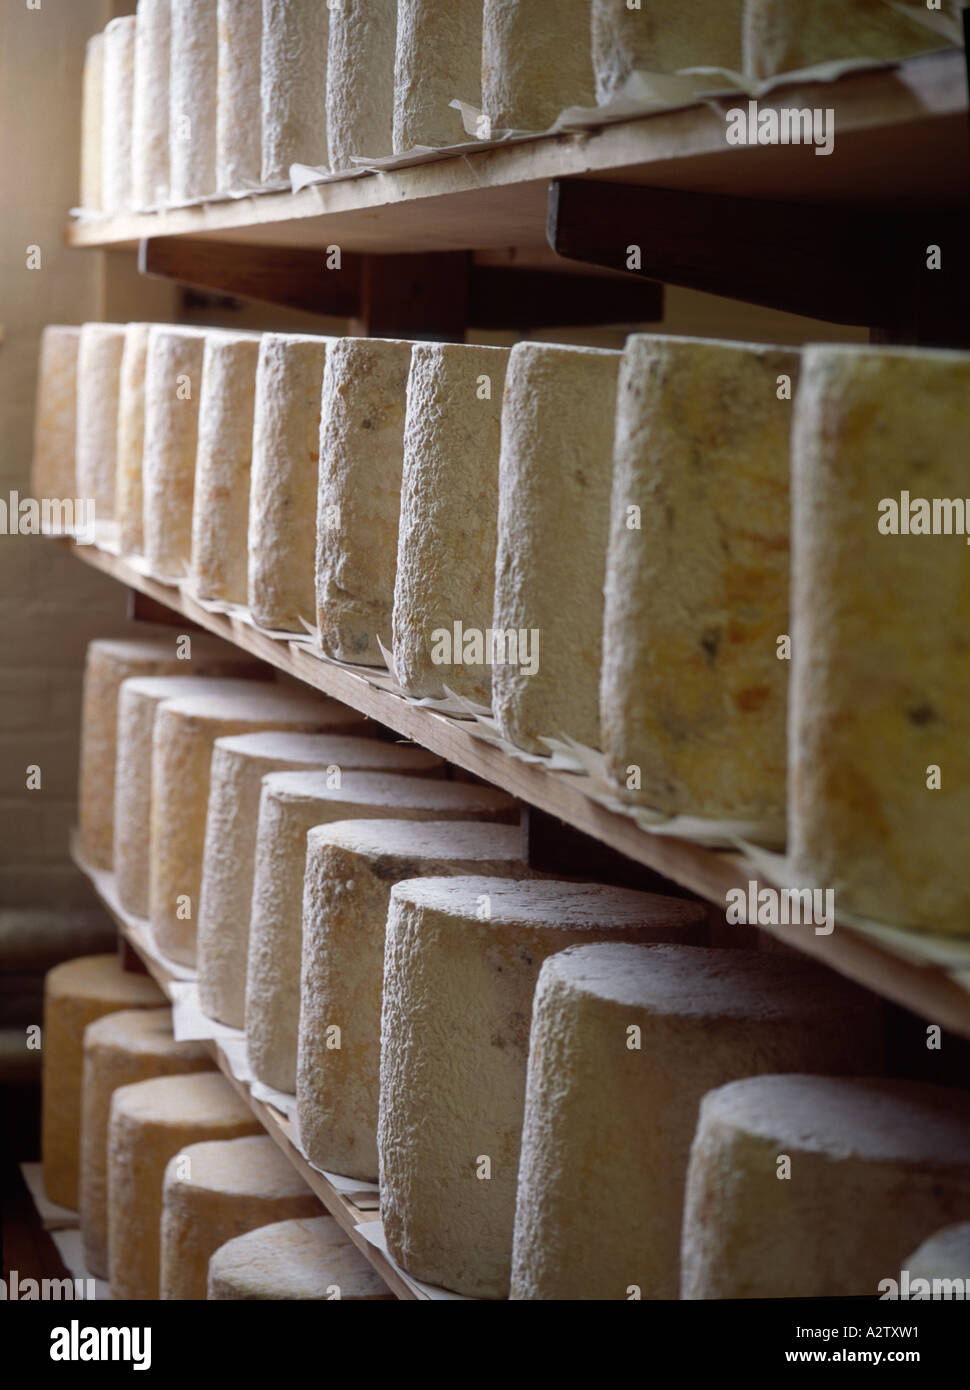 Ageing room where hard cheeses are stored to mature - Stock Image -  F023/1665 - Science Photo Library